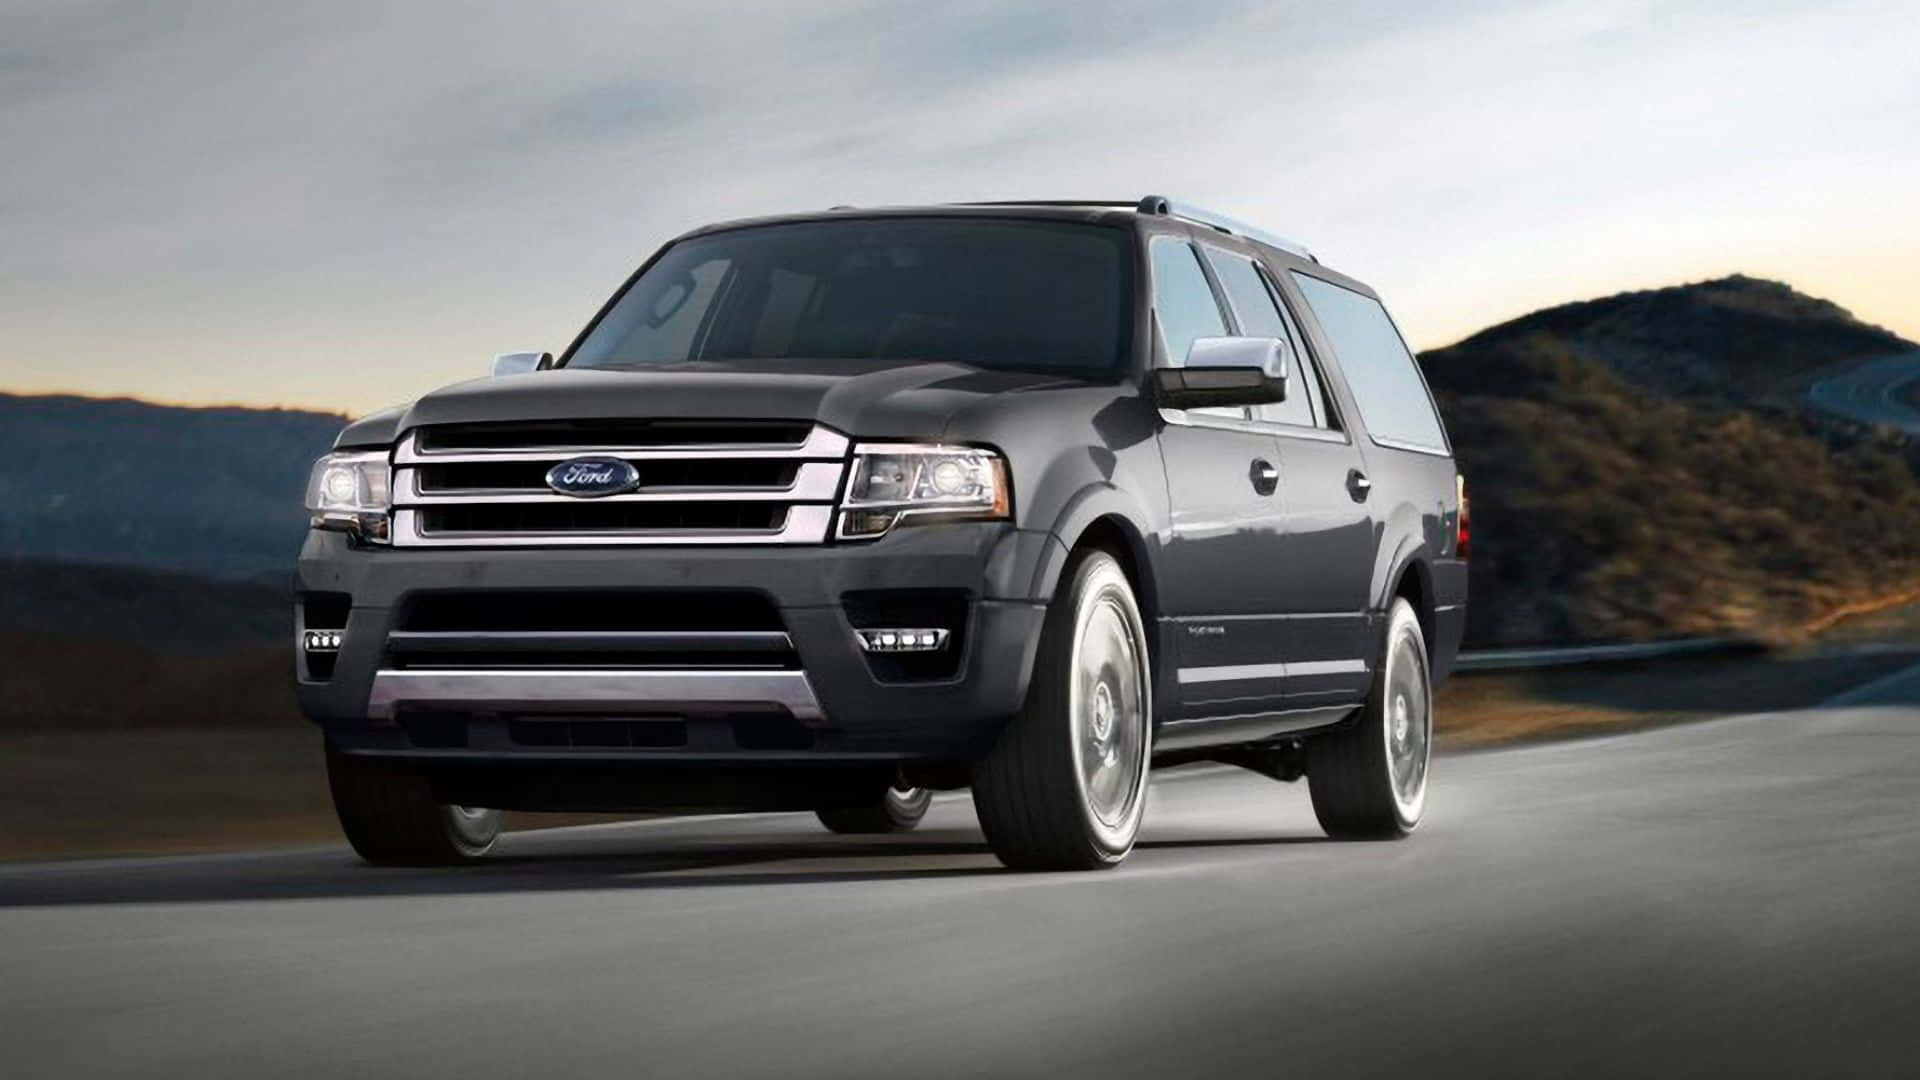 Stunning Ford Expedition on the Road Wallpaper